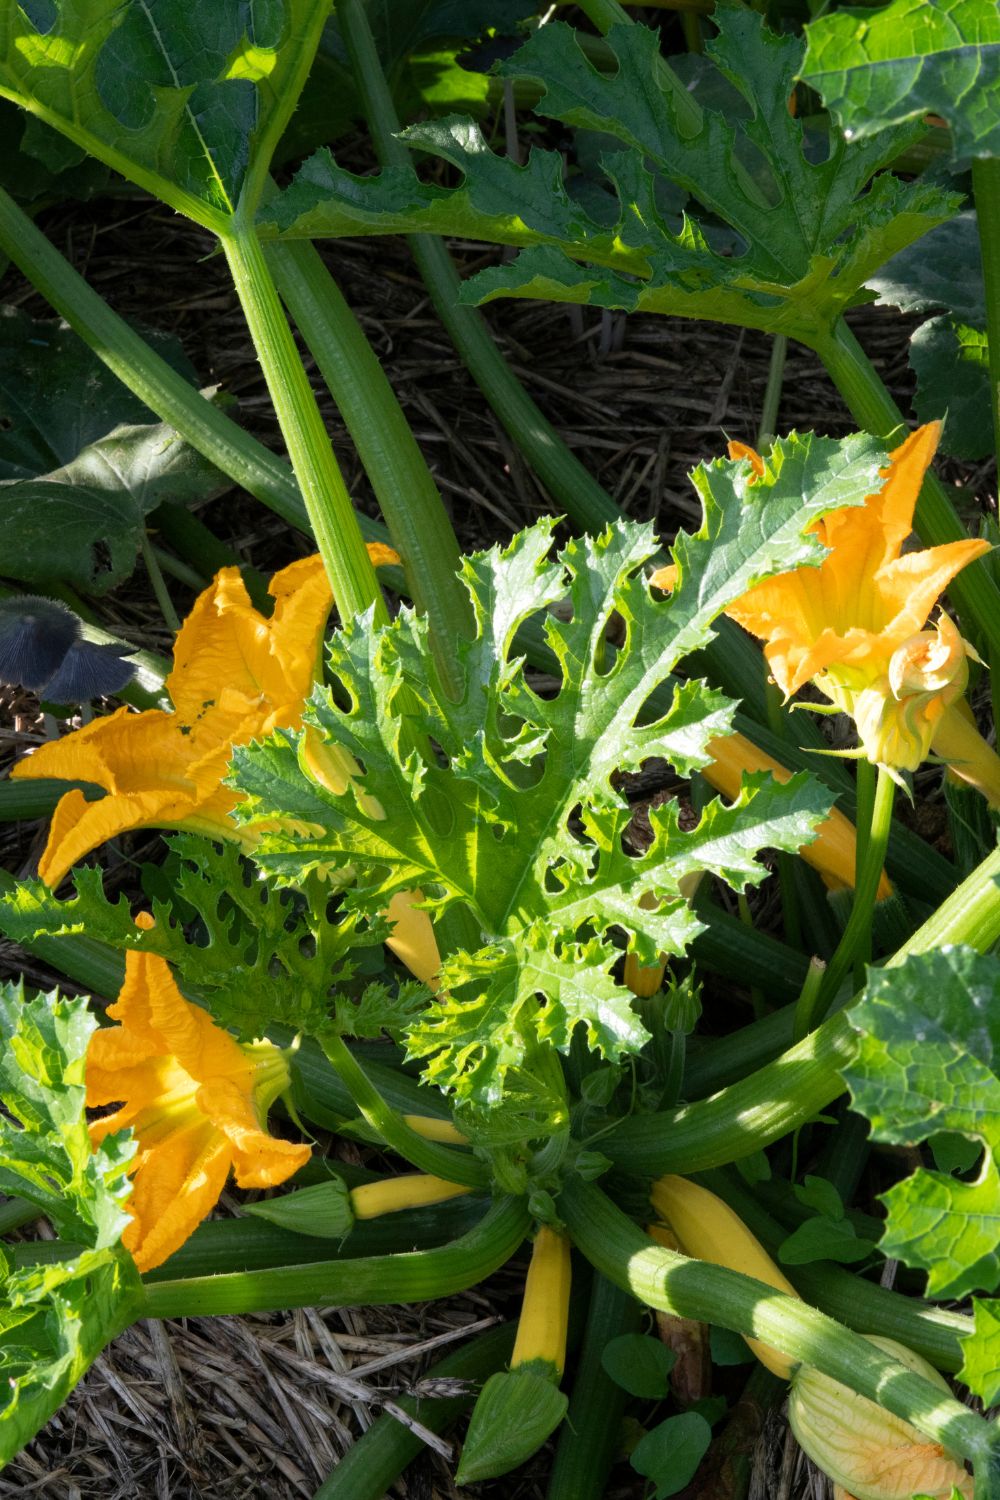 Squash flowering and pollination